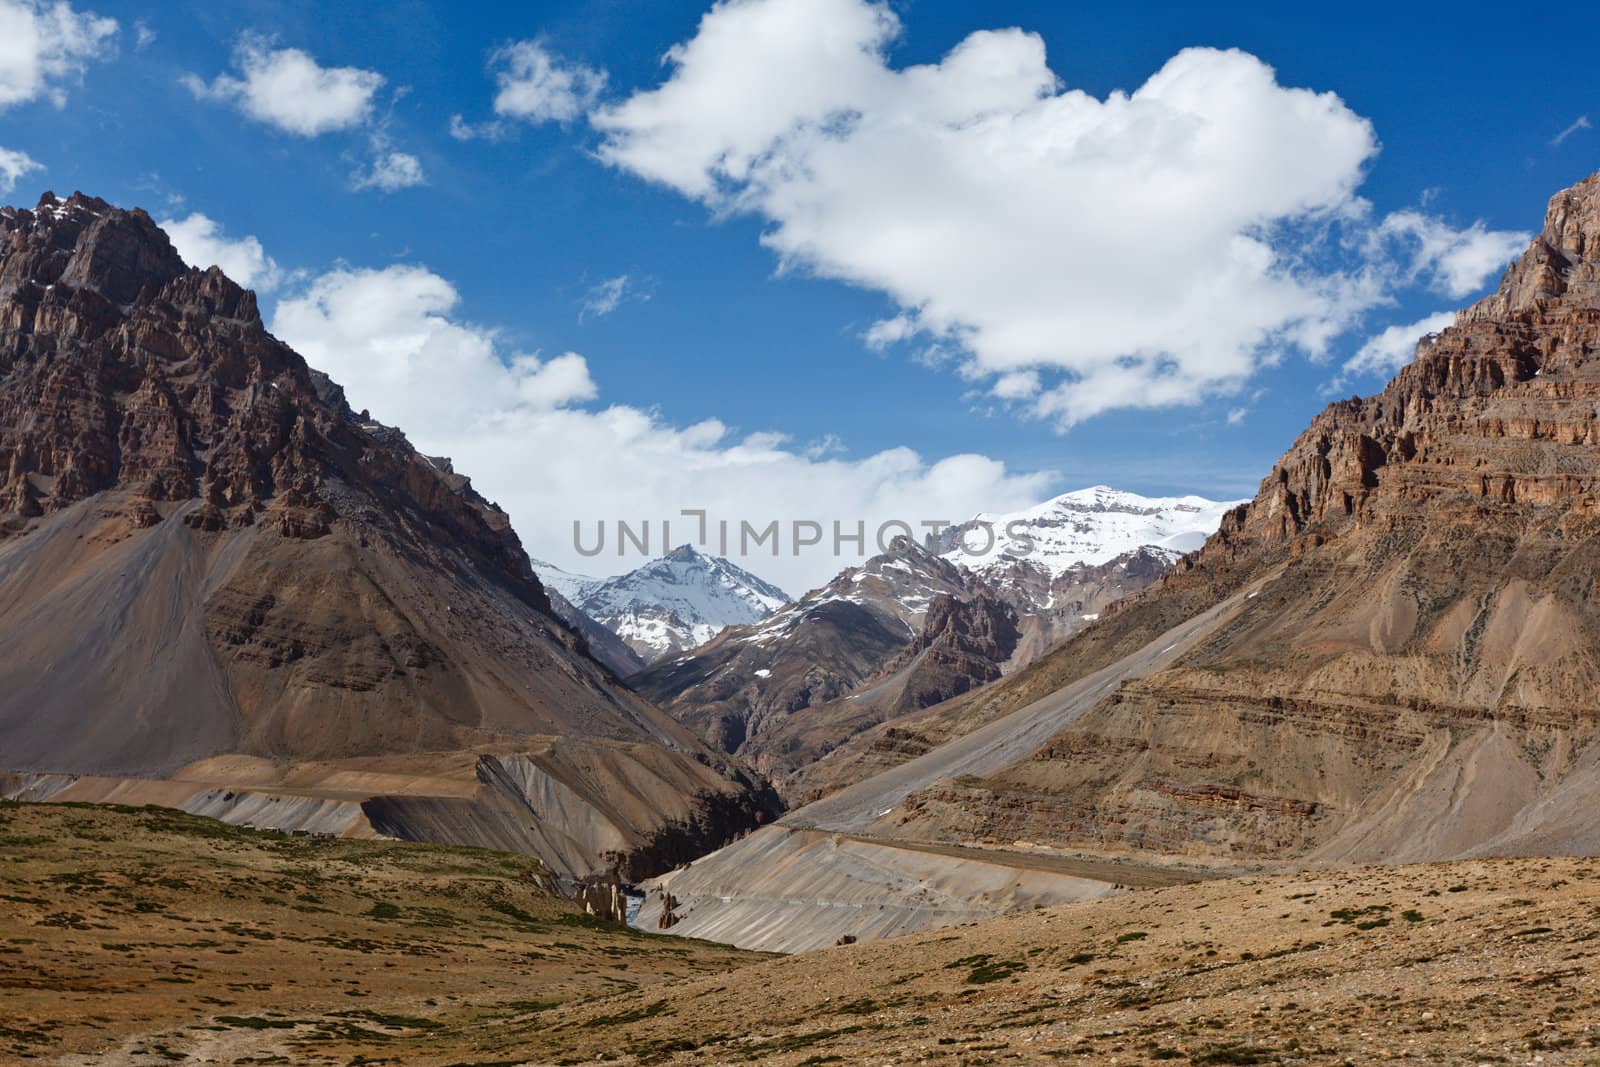 Valley in Himalayas by dimol